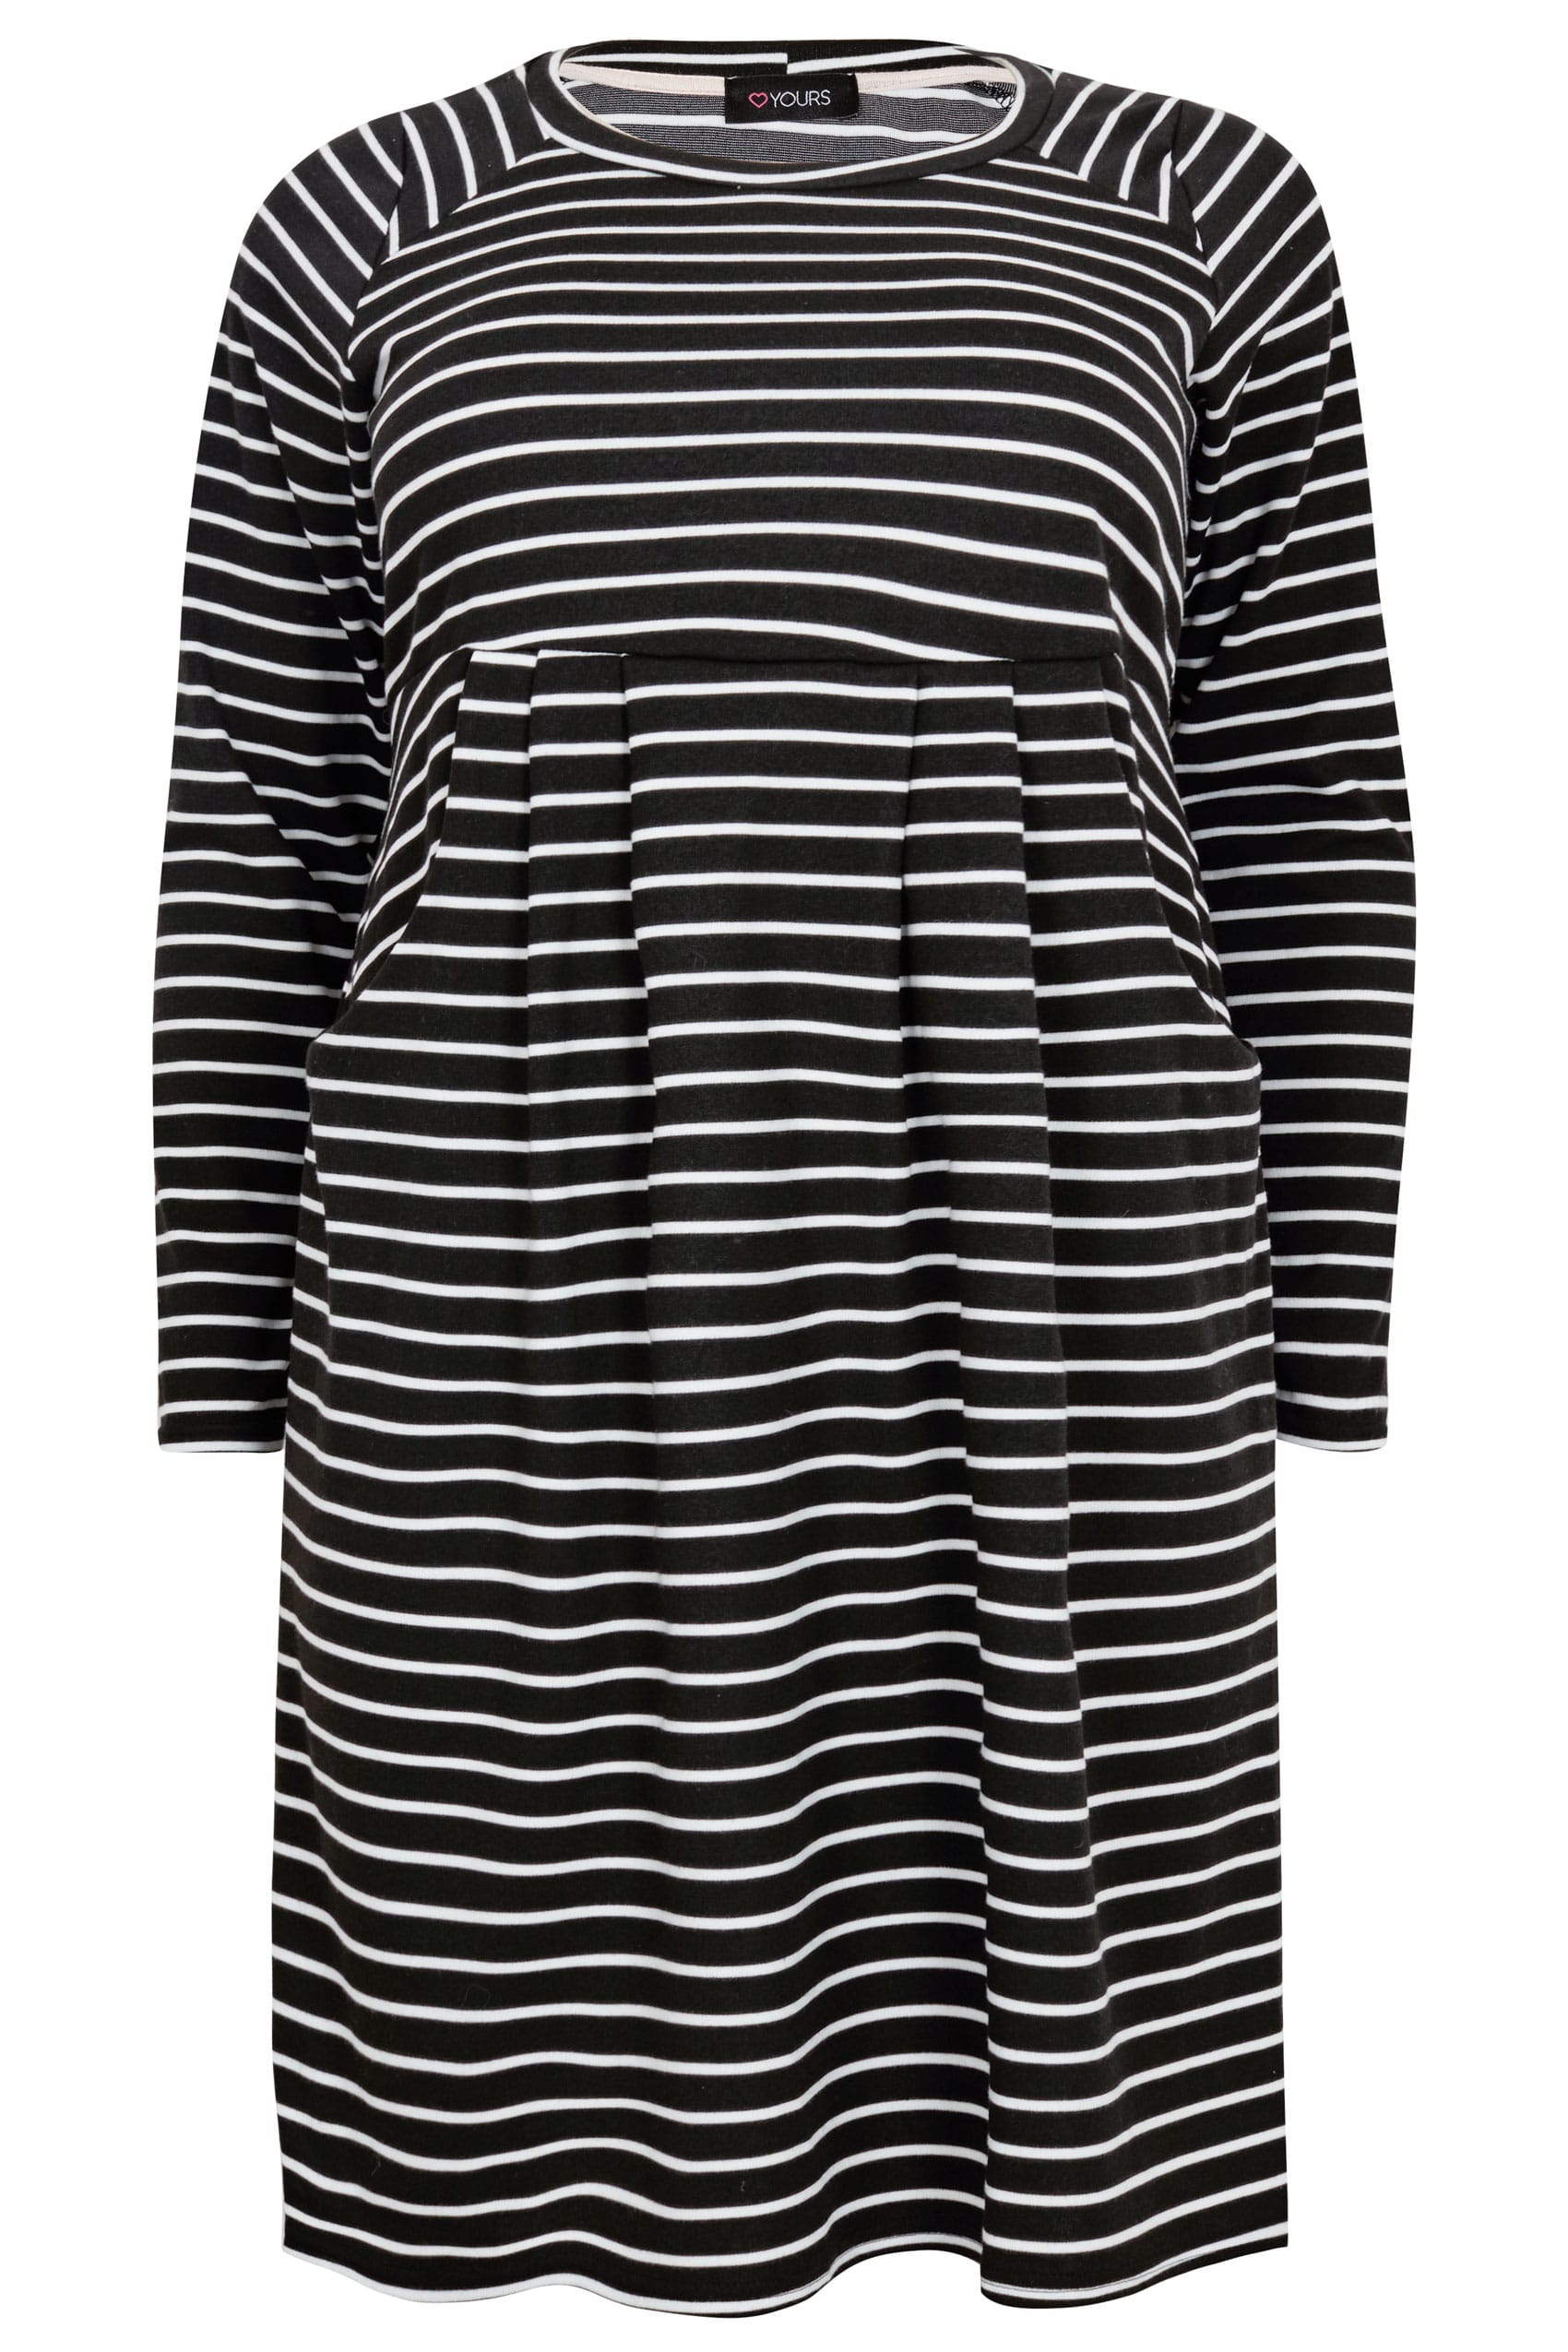 Black & White Striped Dress With Pockets, Plus size 16 to 36